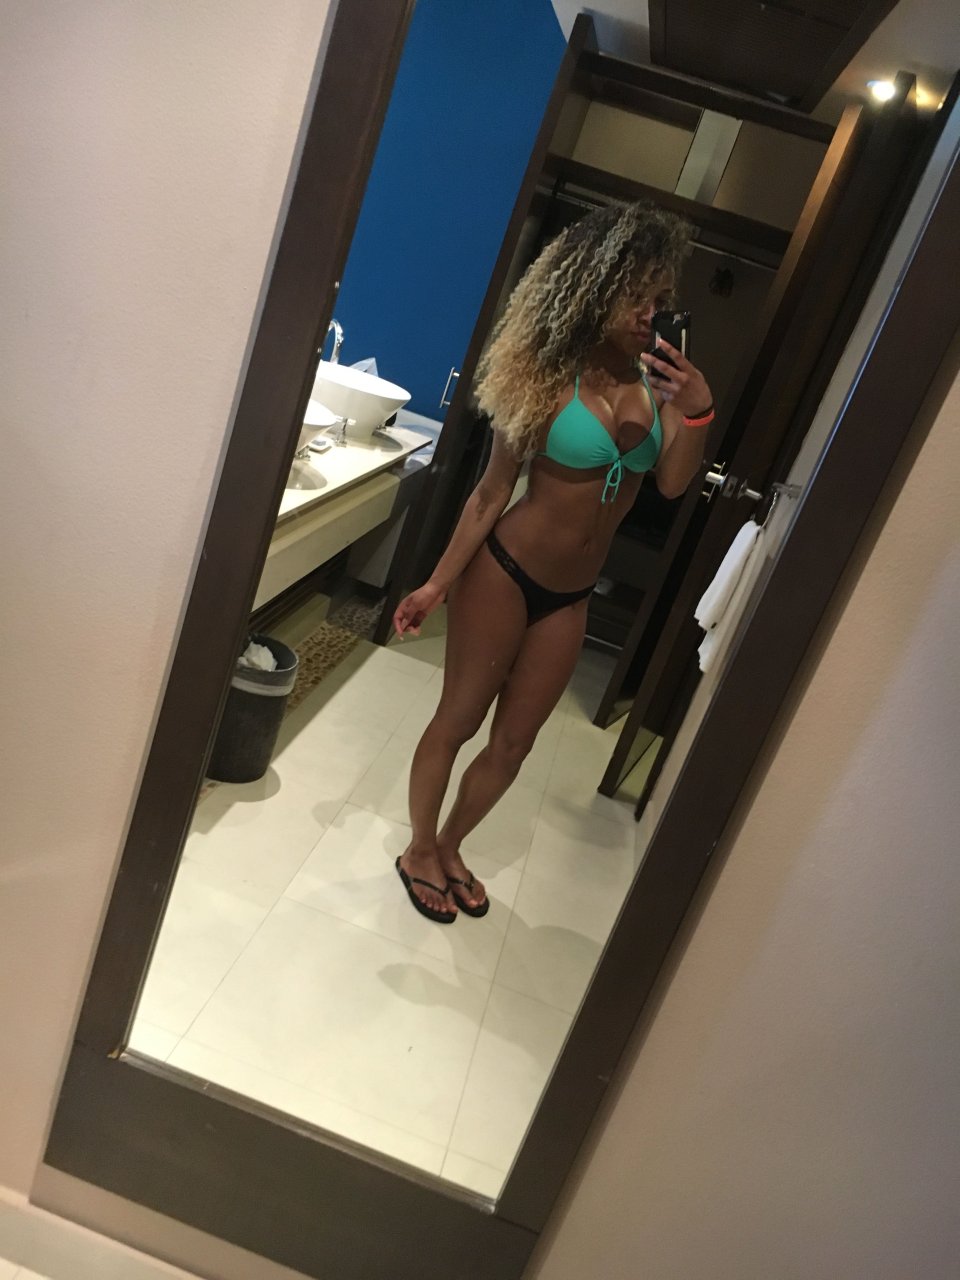 JoJo (WWE) Leaked The Fappening (New Photos) | #TheFappening